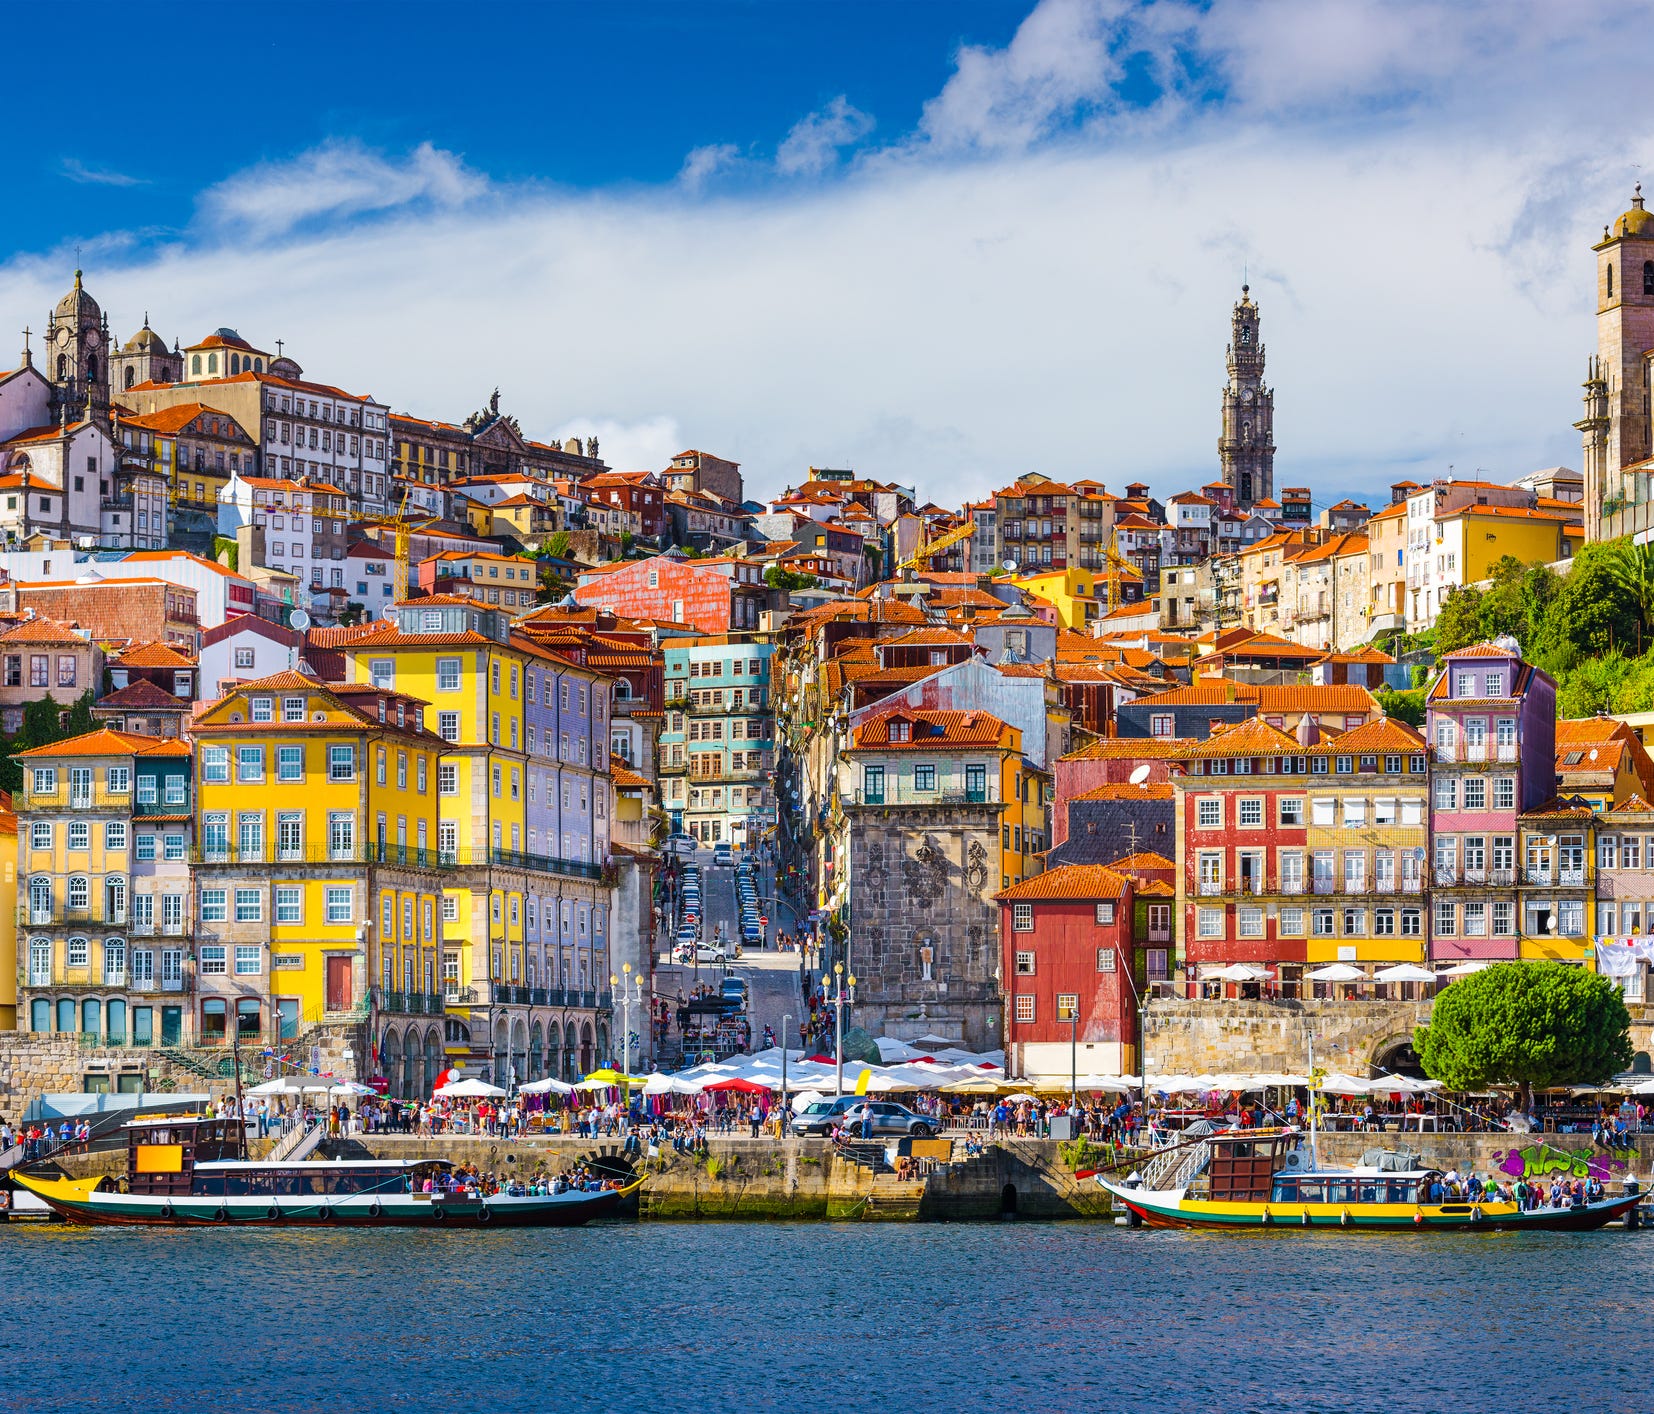 Portugal: The gateway to Europe, Portugal isn't just an affordable alternative to glitzy metropolises like Paris. It's also an understated bucket-list travel destination home to both awe-inspiring natural wonders and culturally rich cities. Bustling 